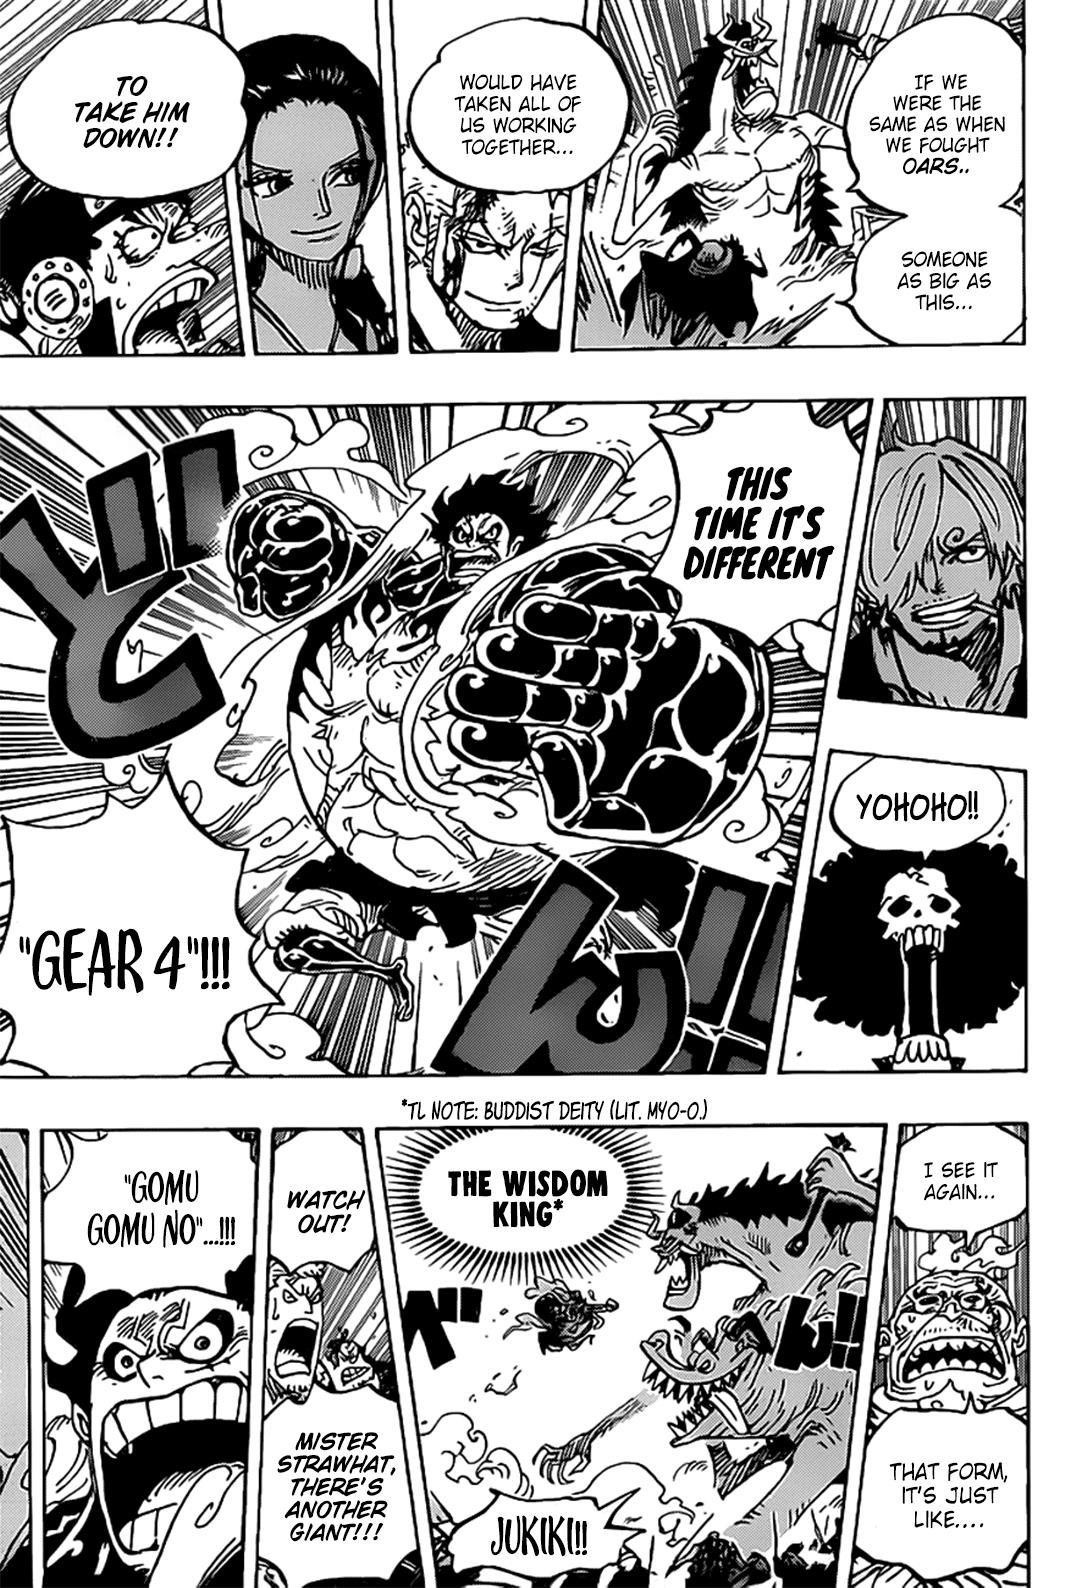 One Piece Chapter 990 - One Piece Manga Online